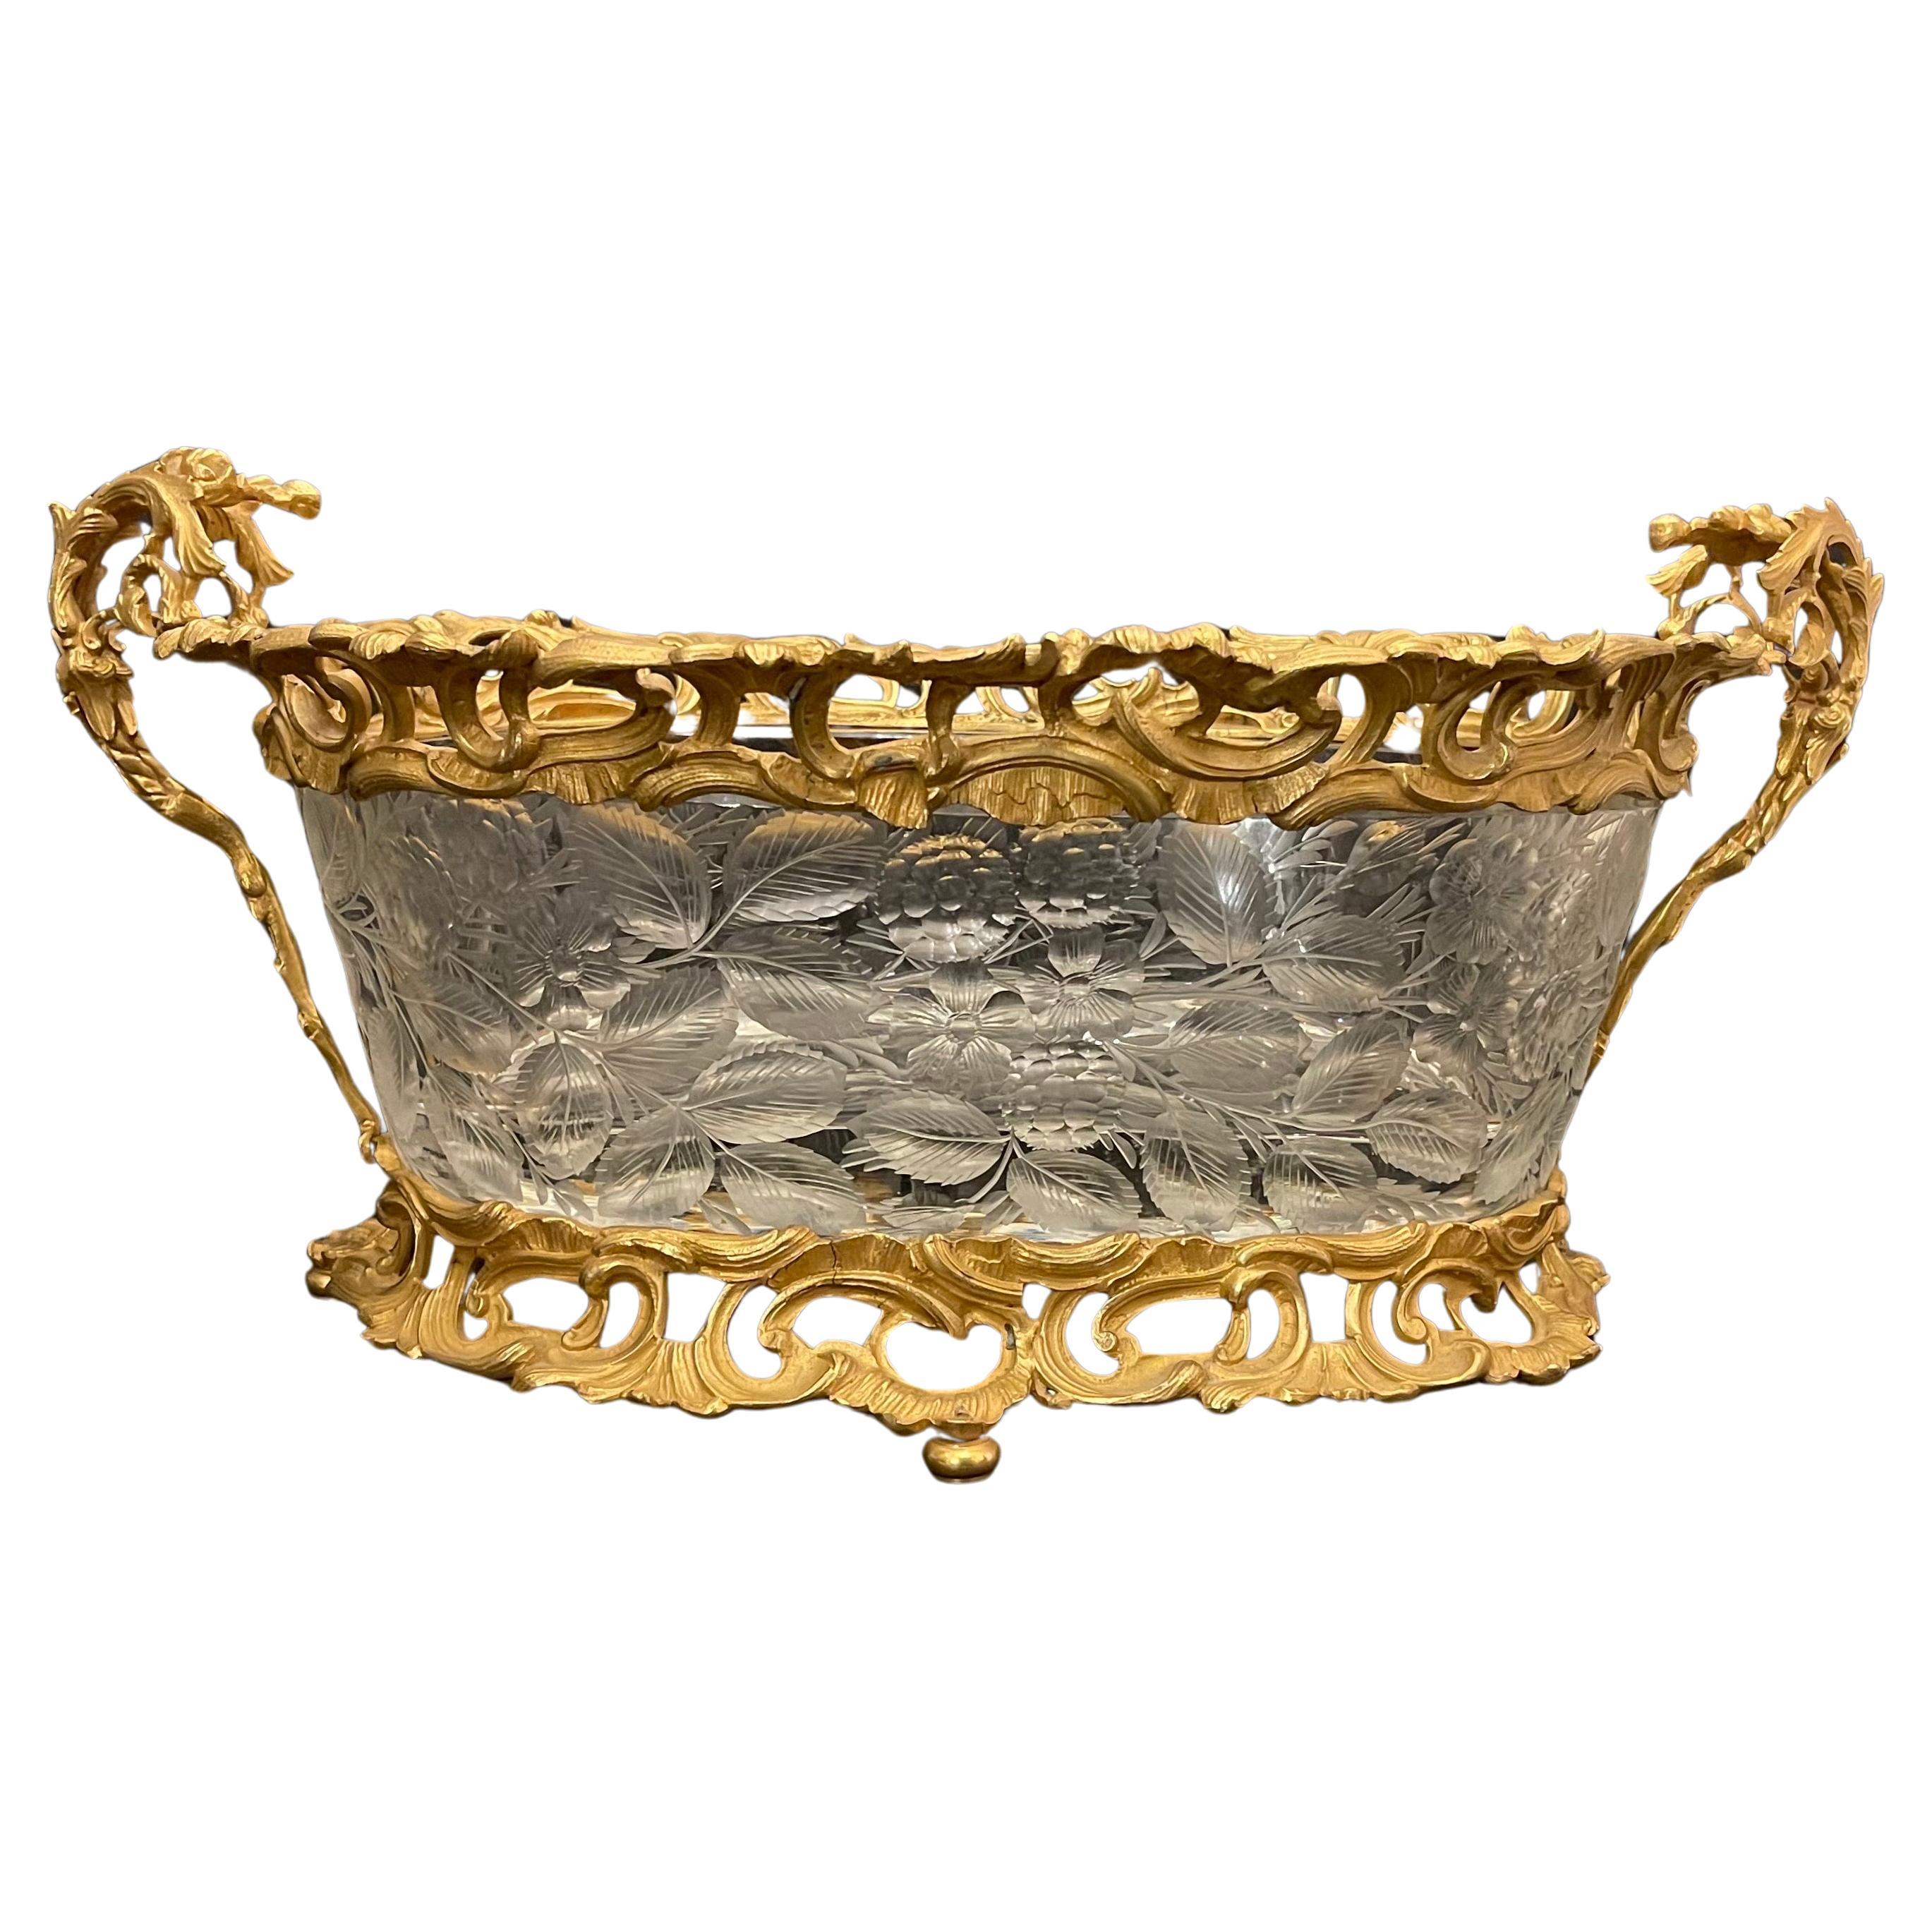 Wonderful French Dore Bronze Ormolu Etched Crystal Centerpiece Les Mures Robert For Sale